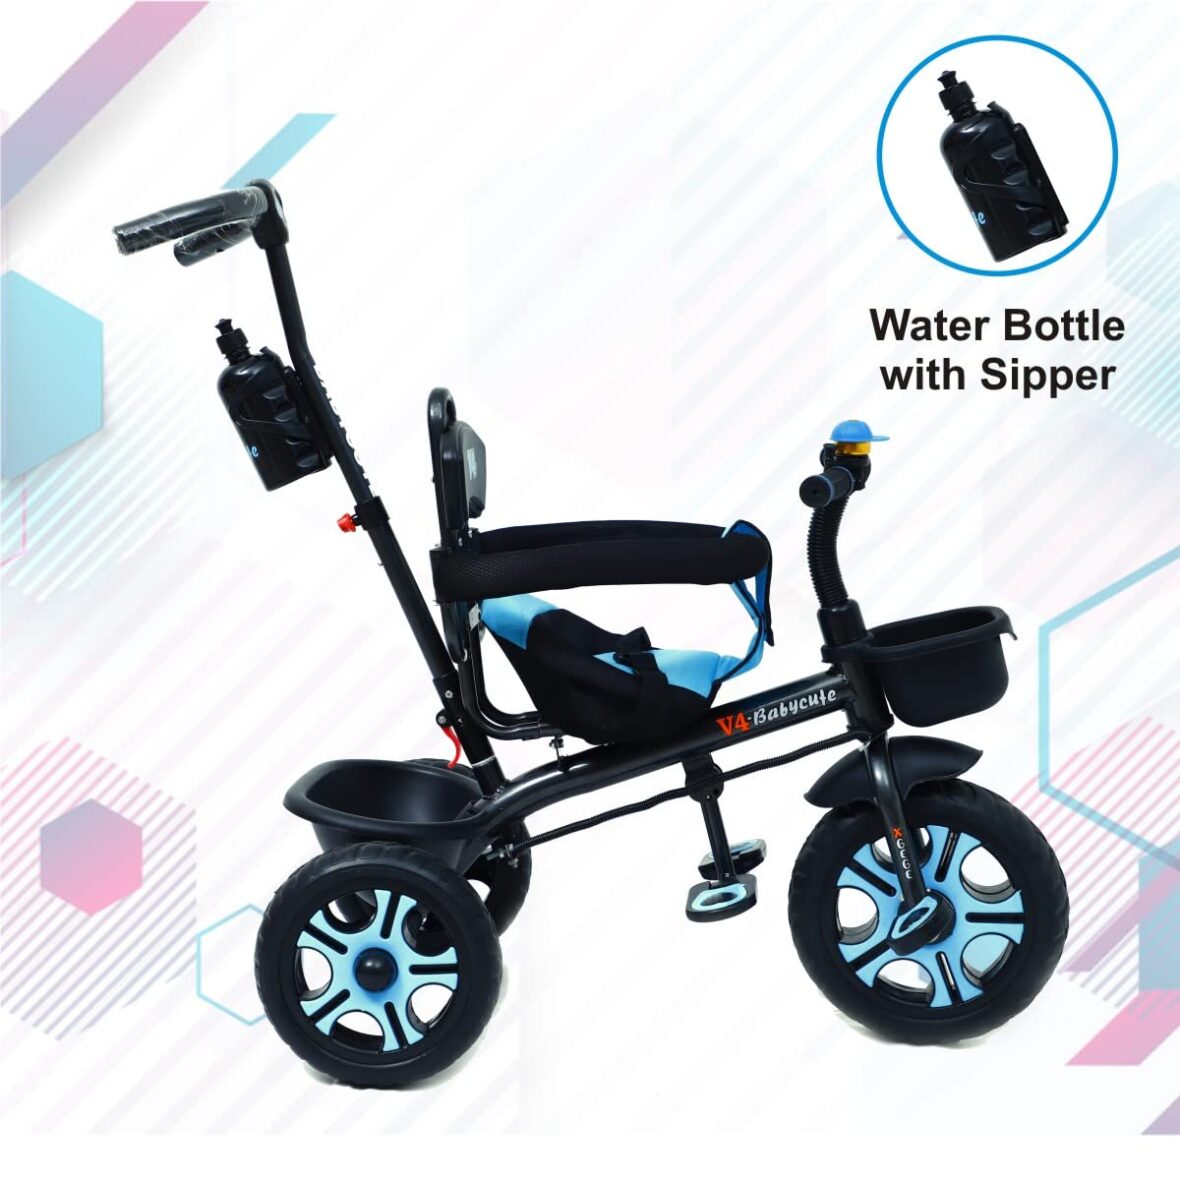 BabyCute V-4 Sports Plug and Play Tricycle for Kids with Parental Control, Baby Cute V4 Baby Cycle for 2-5 Years Old. (BLUE) (Copy)